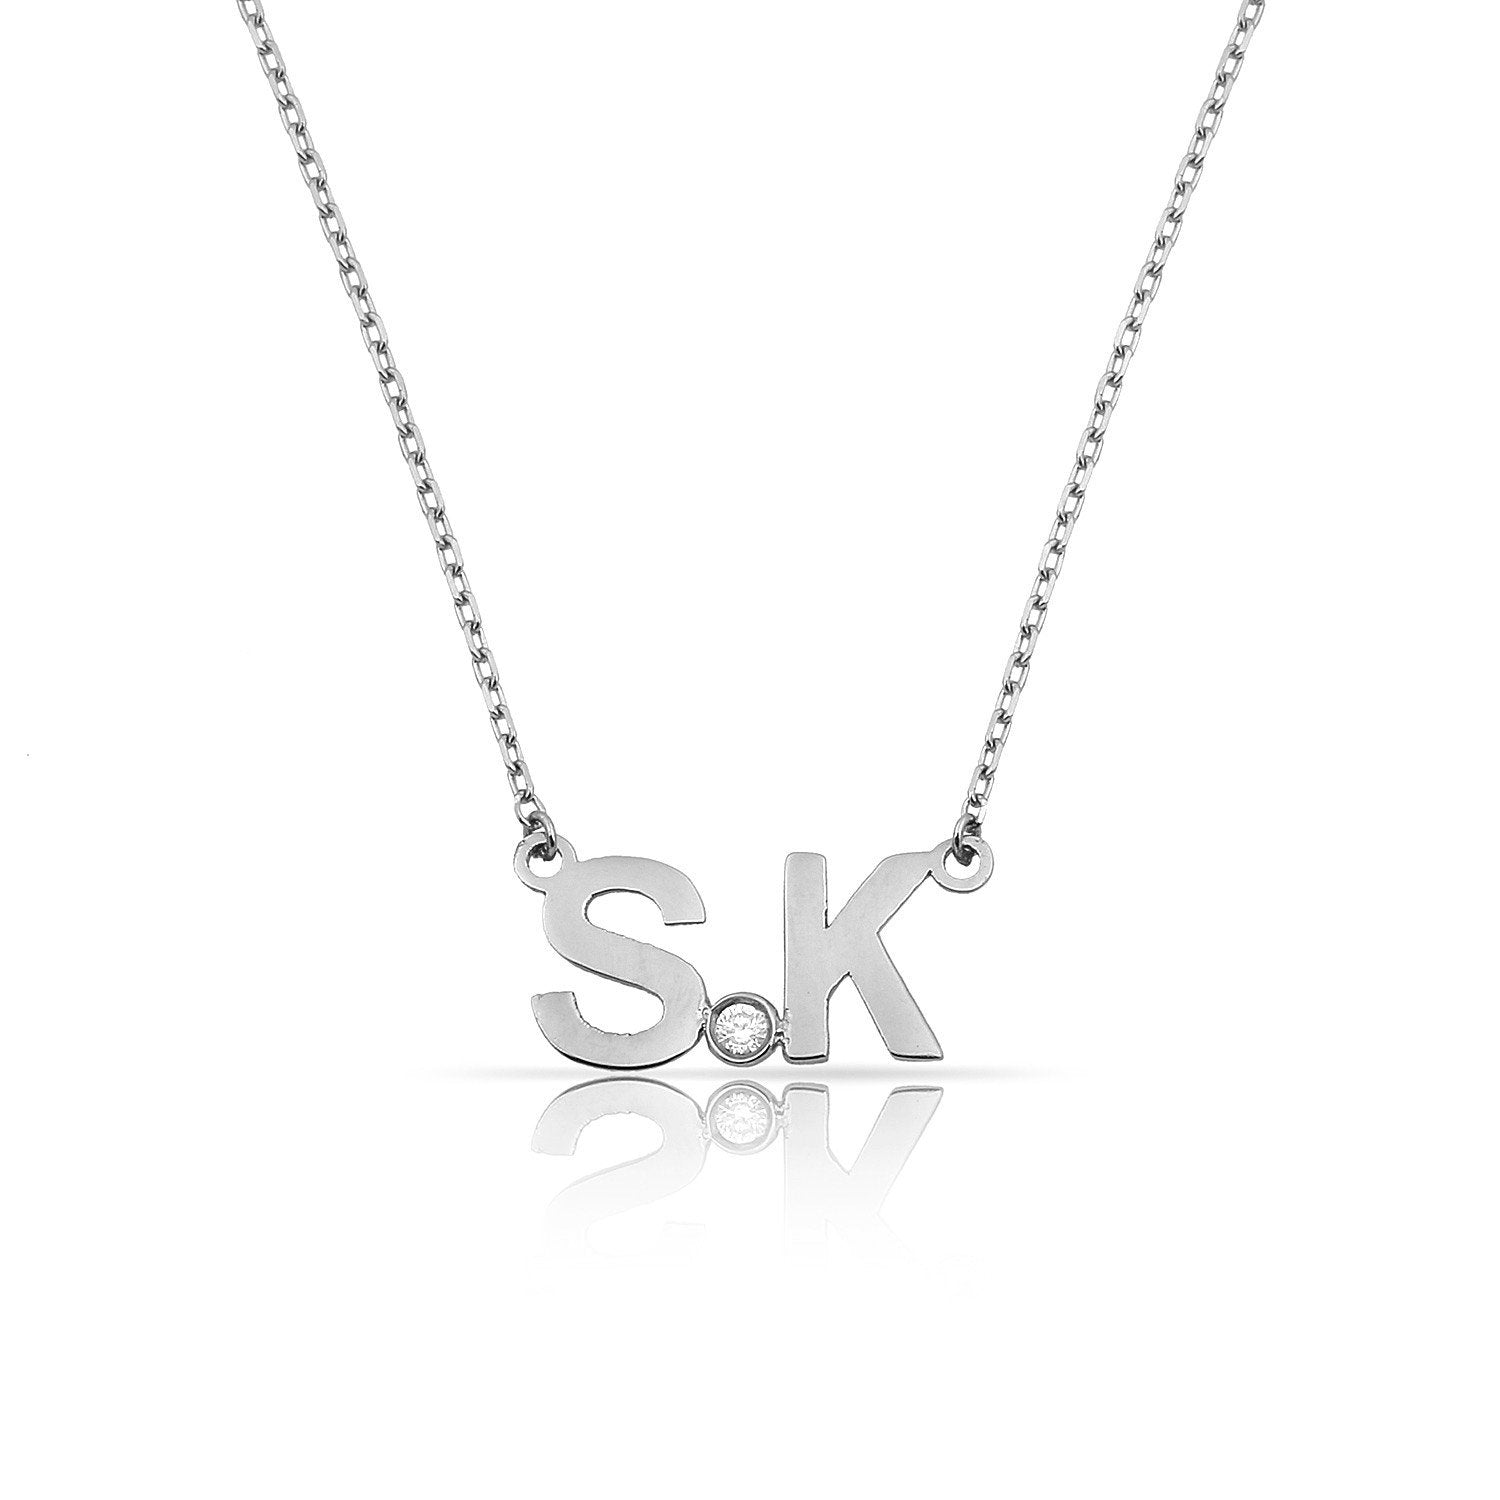 TSK Perfect Pair Initial Necklace JEWELRY The Sis Kiss 14k White Gold with a single diamond